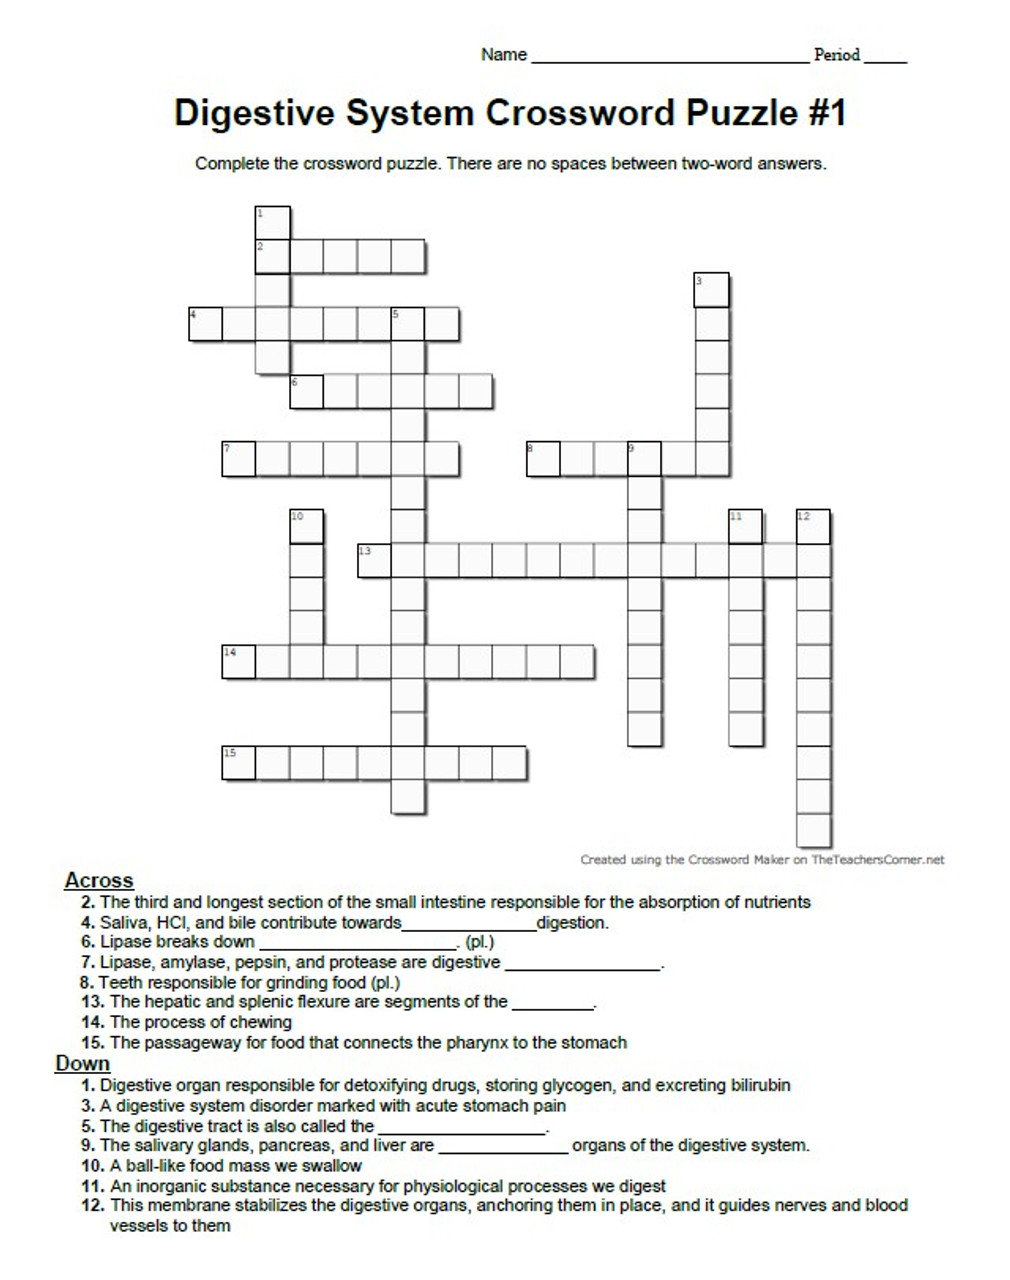 Digestive system crossword puzzle set of four